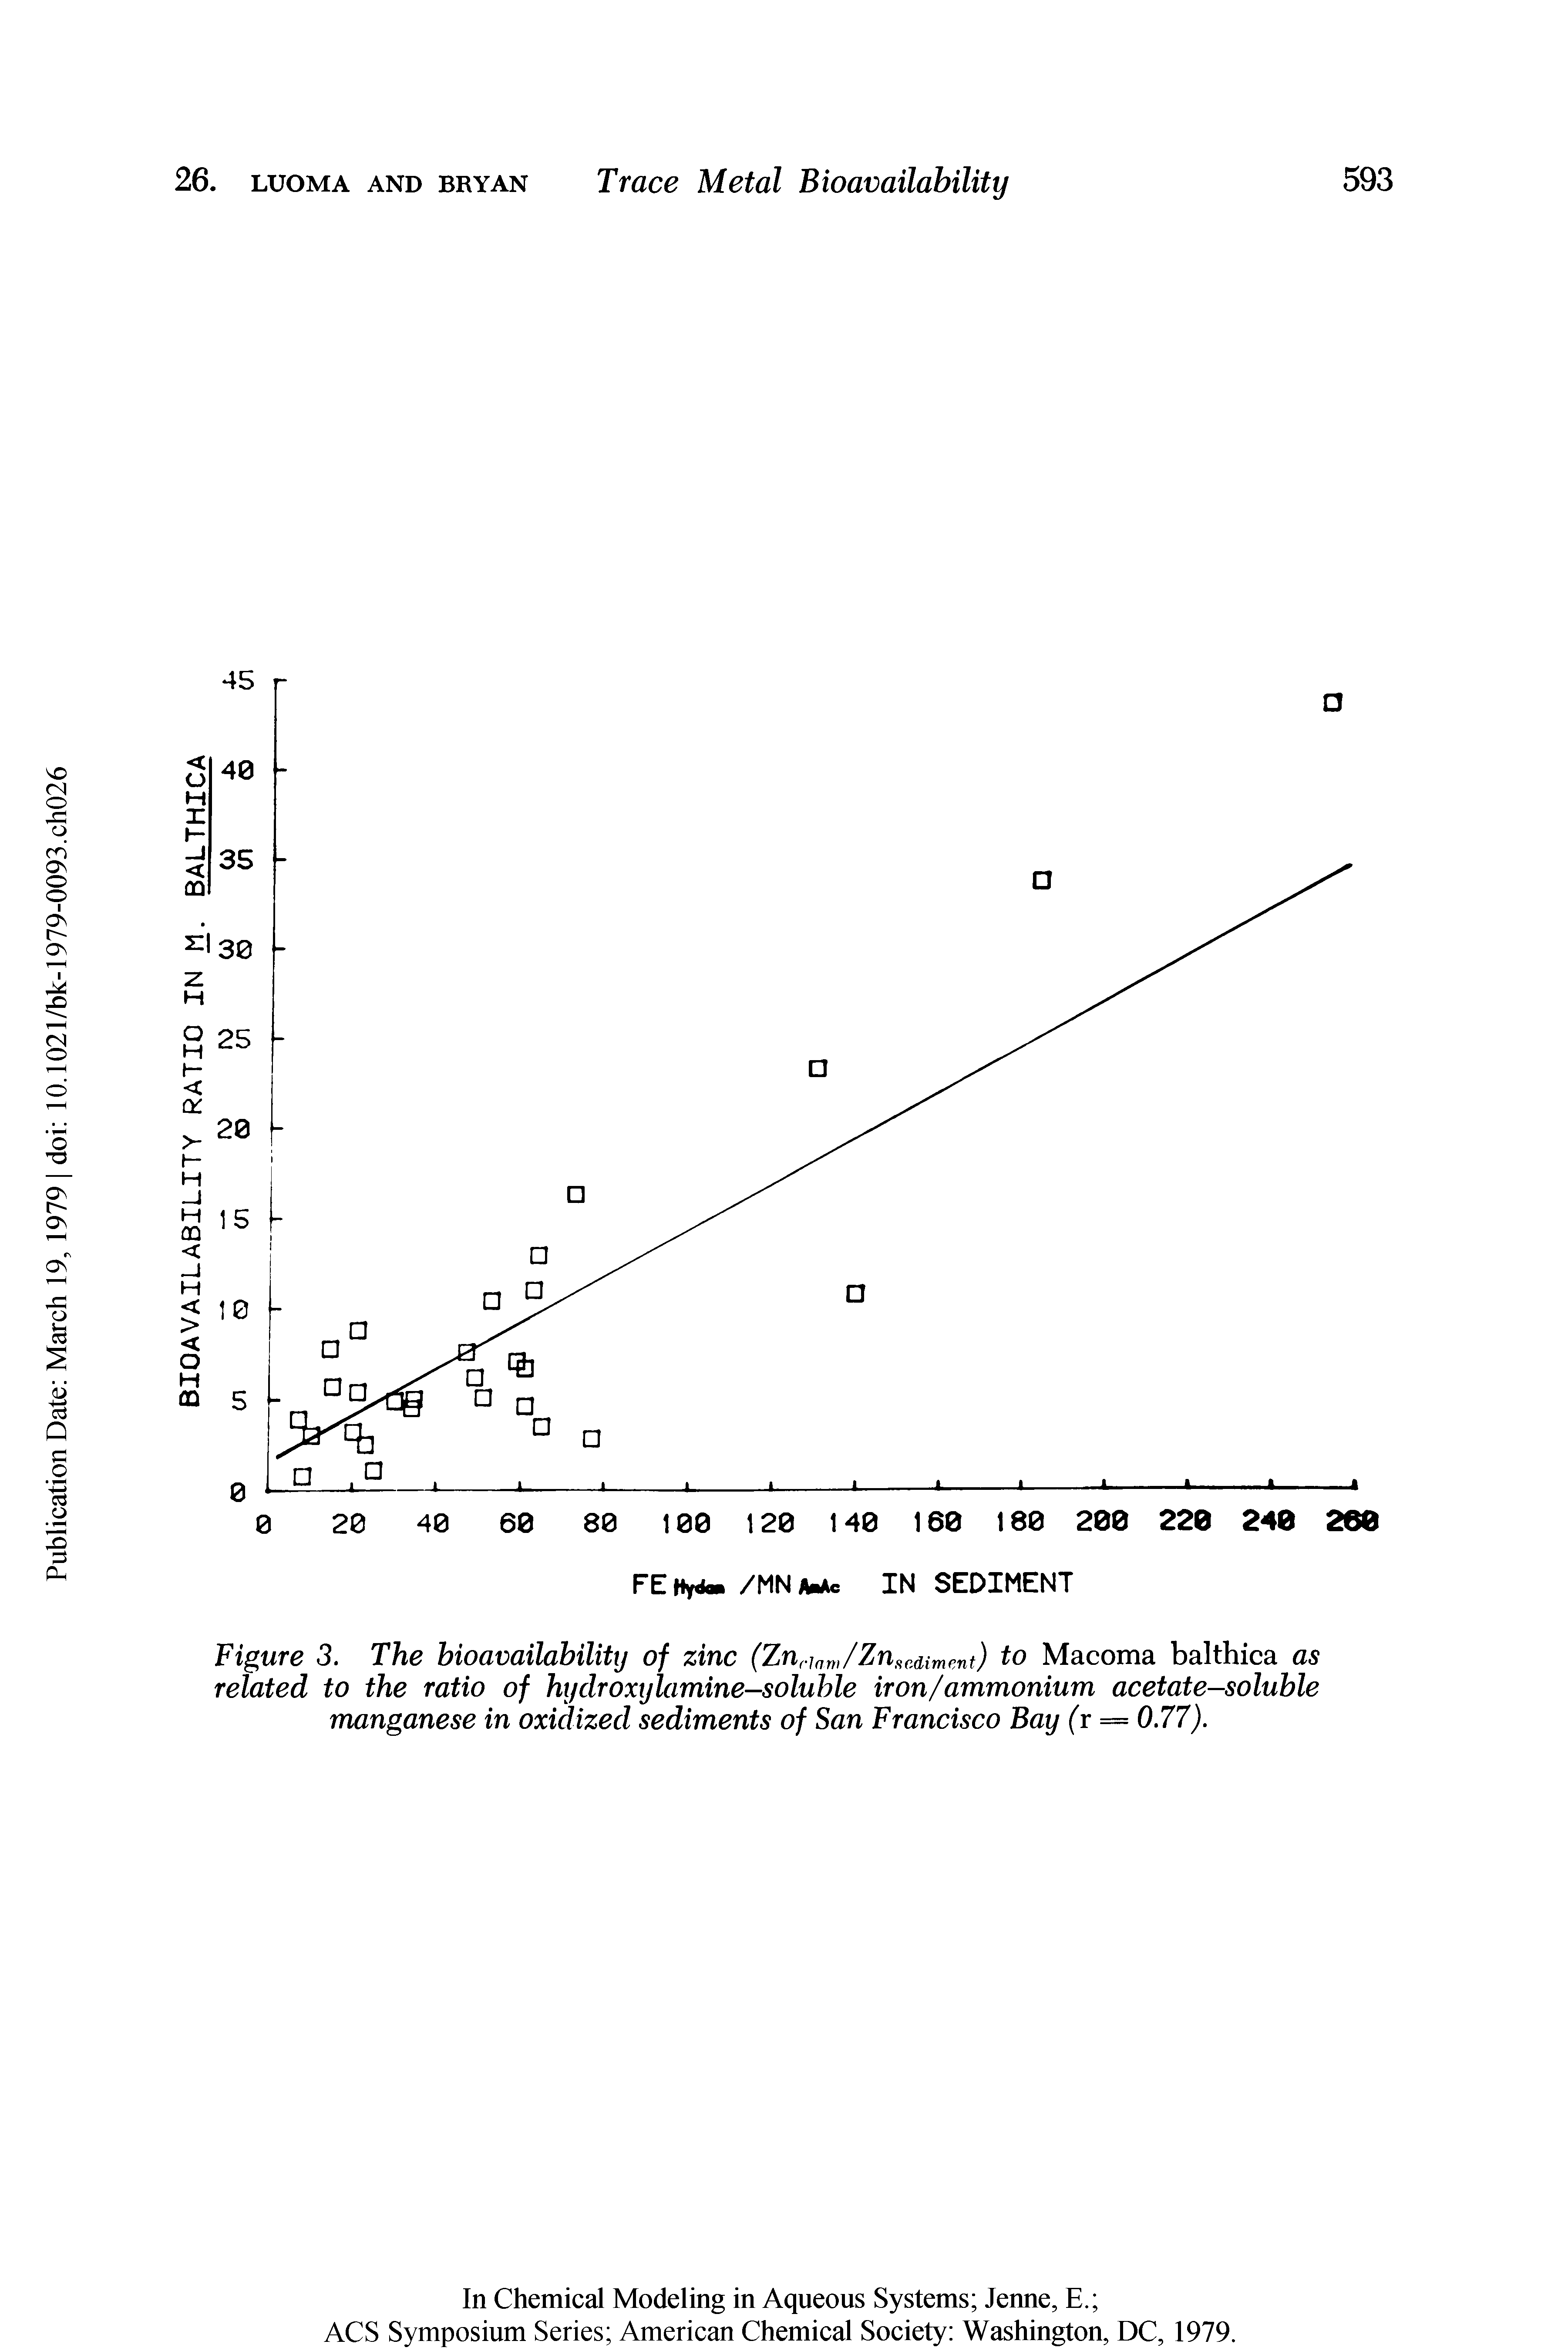 Figure 3. The hioavailability of zinc (Zurinm/Zuscdiment) to Macoma balthica as related to the ratio of hijdroxylamine—soluble iron/ammonium acetate-soluble manganese in oxidized sediments of San Francisco Bay (r = 0.77).